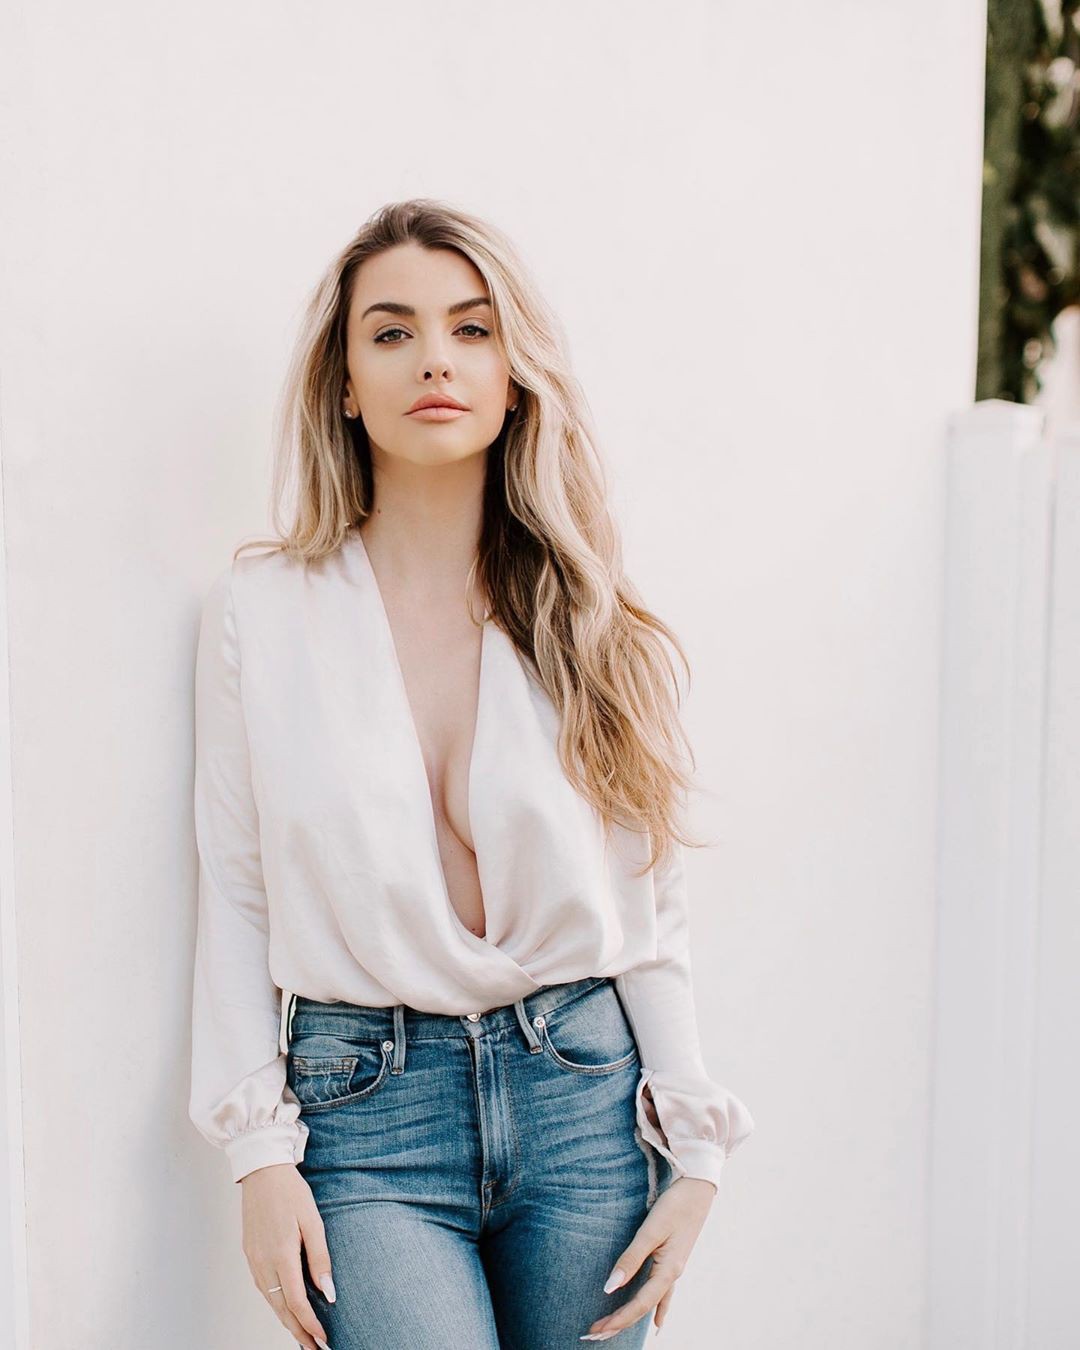 white colour outfit, you must try with denim, jeans, Woman Long Hair Style  | Emily Sears Instagram | Australian Model Emily Sears, White Denim, White  Jeans